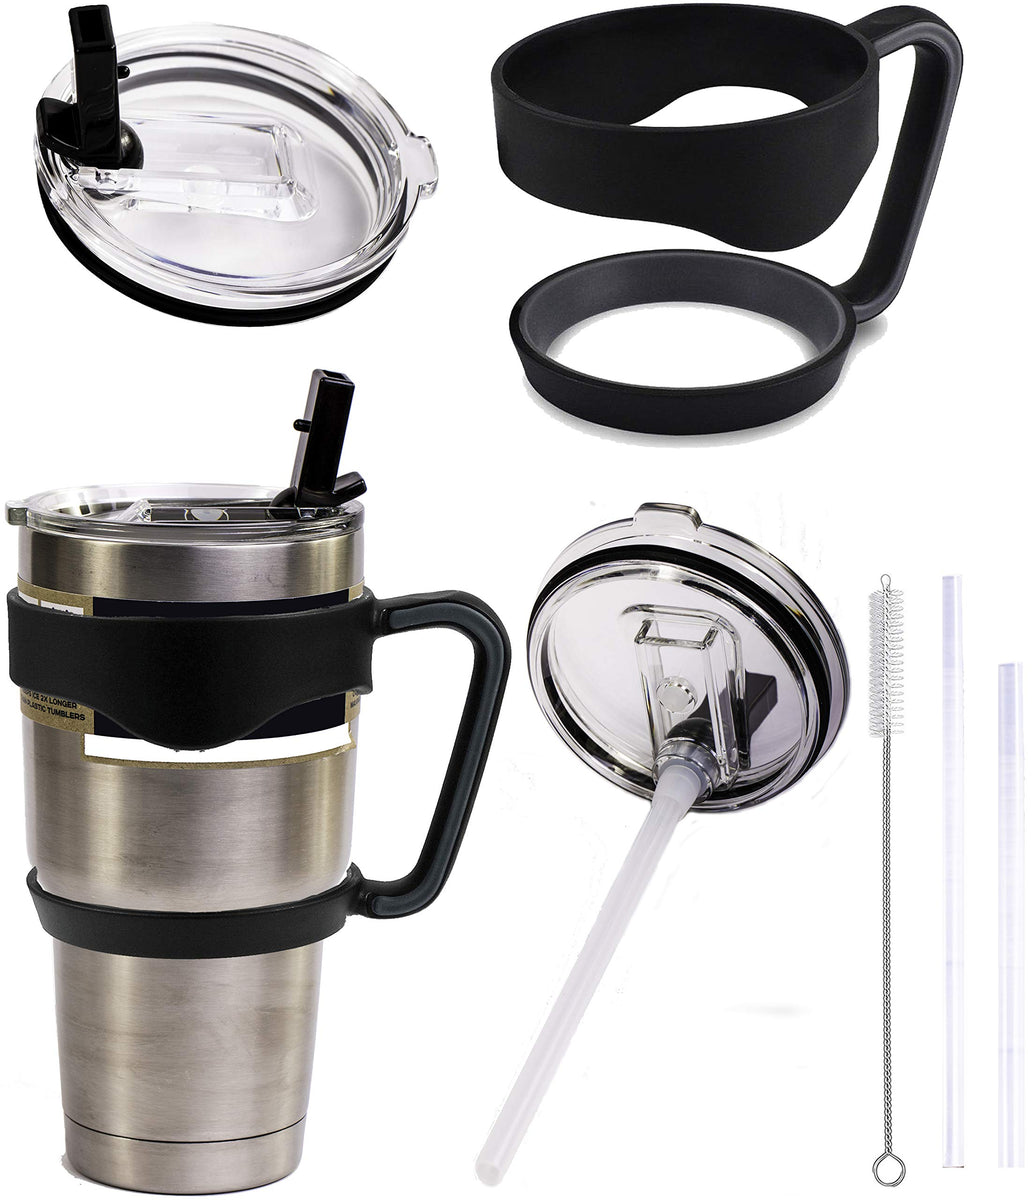 CocoStraw 30oz Straw Lid + 4 Stainless Steel Straws Replacement  for Yeti RTIC Polar Drifter Big Boss Sic Tumbler Rambler Cups with Cleaning  Brush NO SPILL: Tumblers & Water Glasses